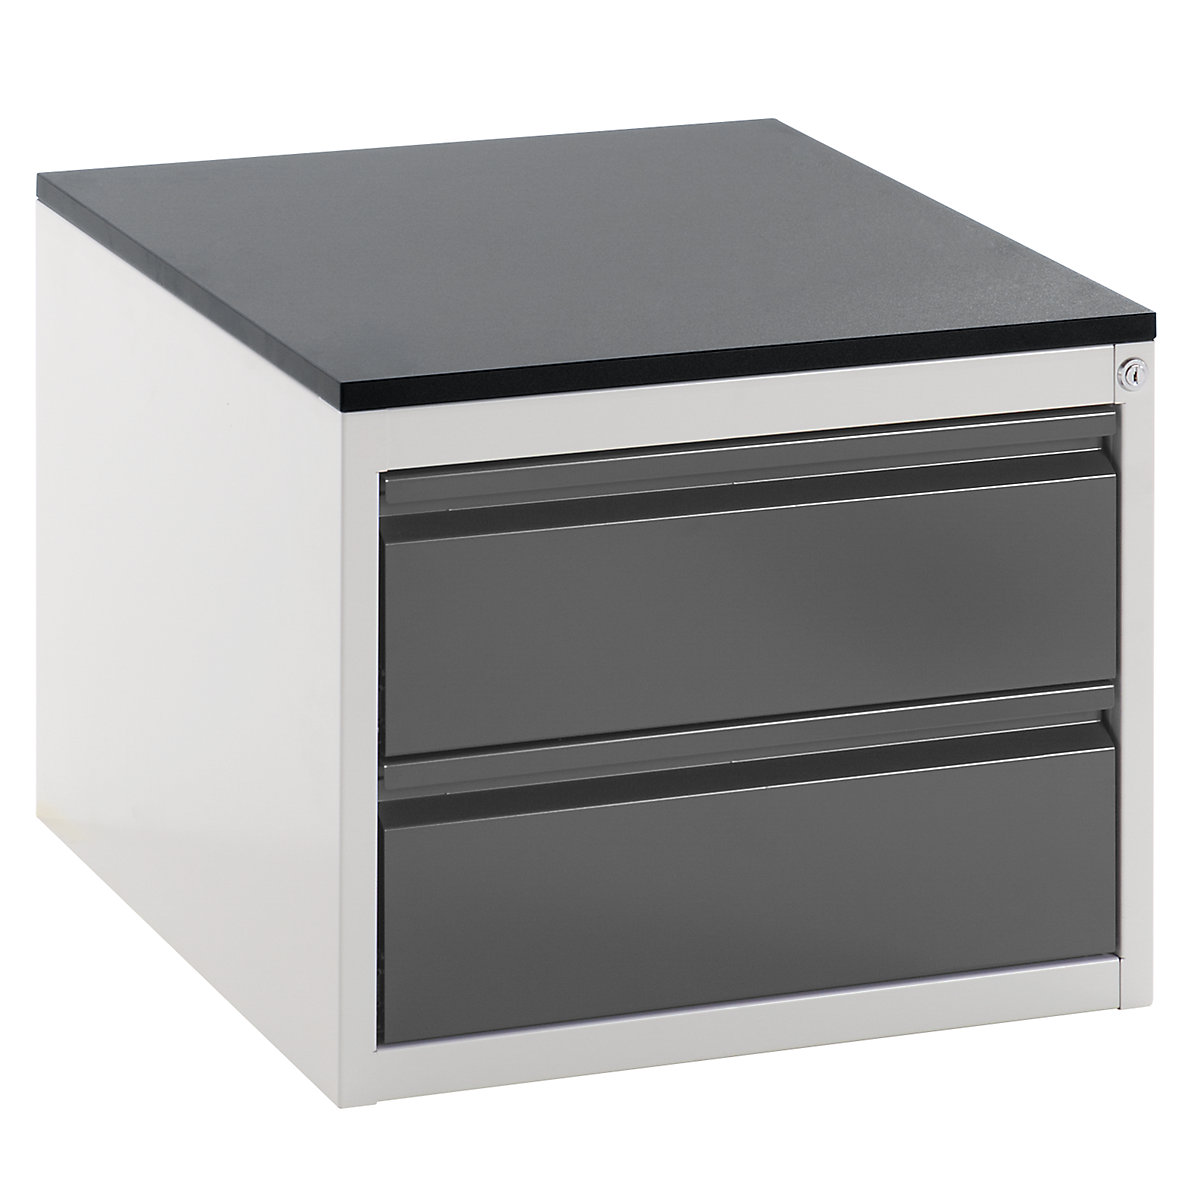 Drawer cupboard with telescopic guides – RAU, height 460 mm, 2 x 180 mm drawers, light grey / metallic charcoal, width 580 mm-12